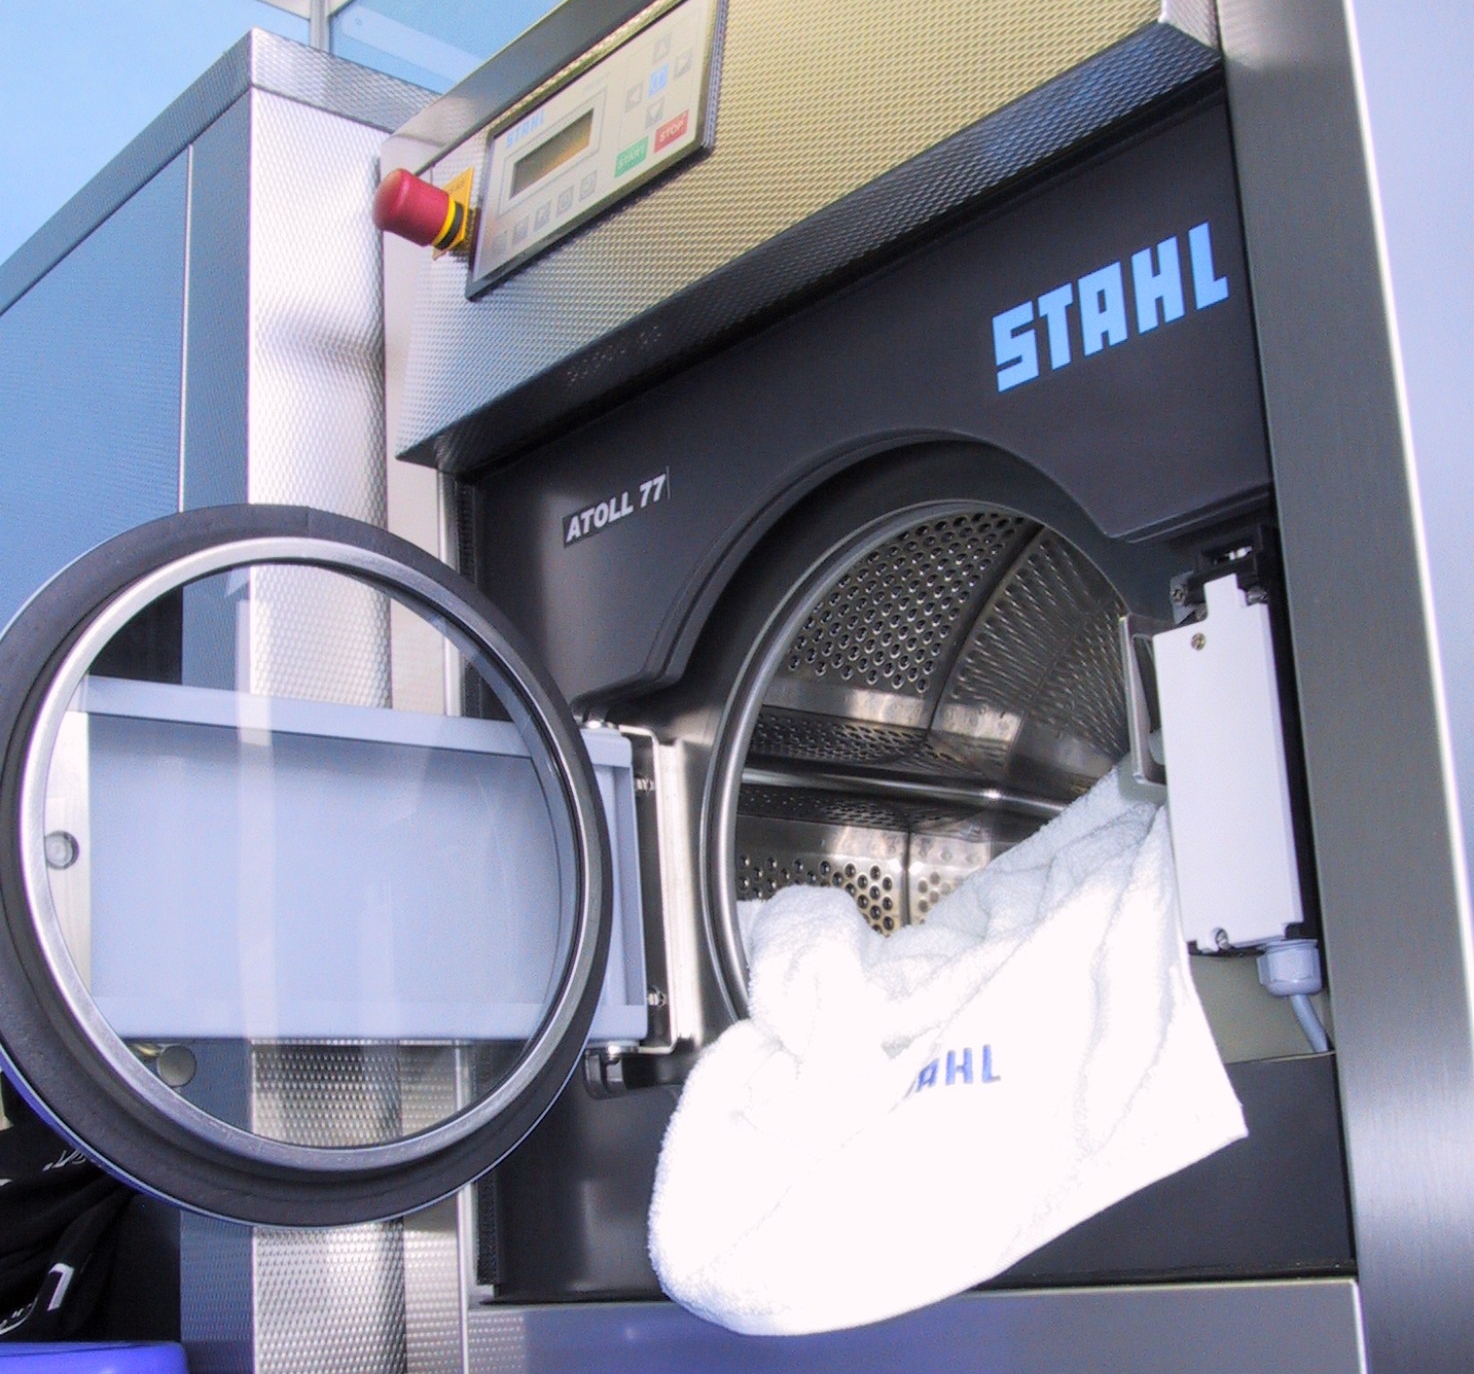 Commercial washing machine manufactured by Stahl